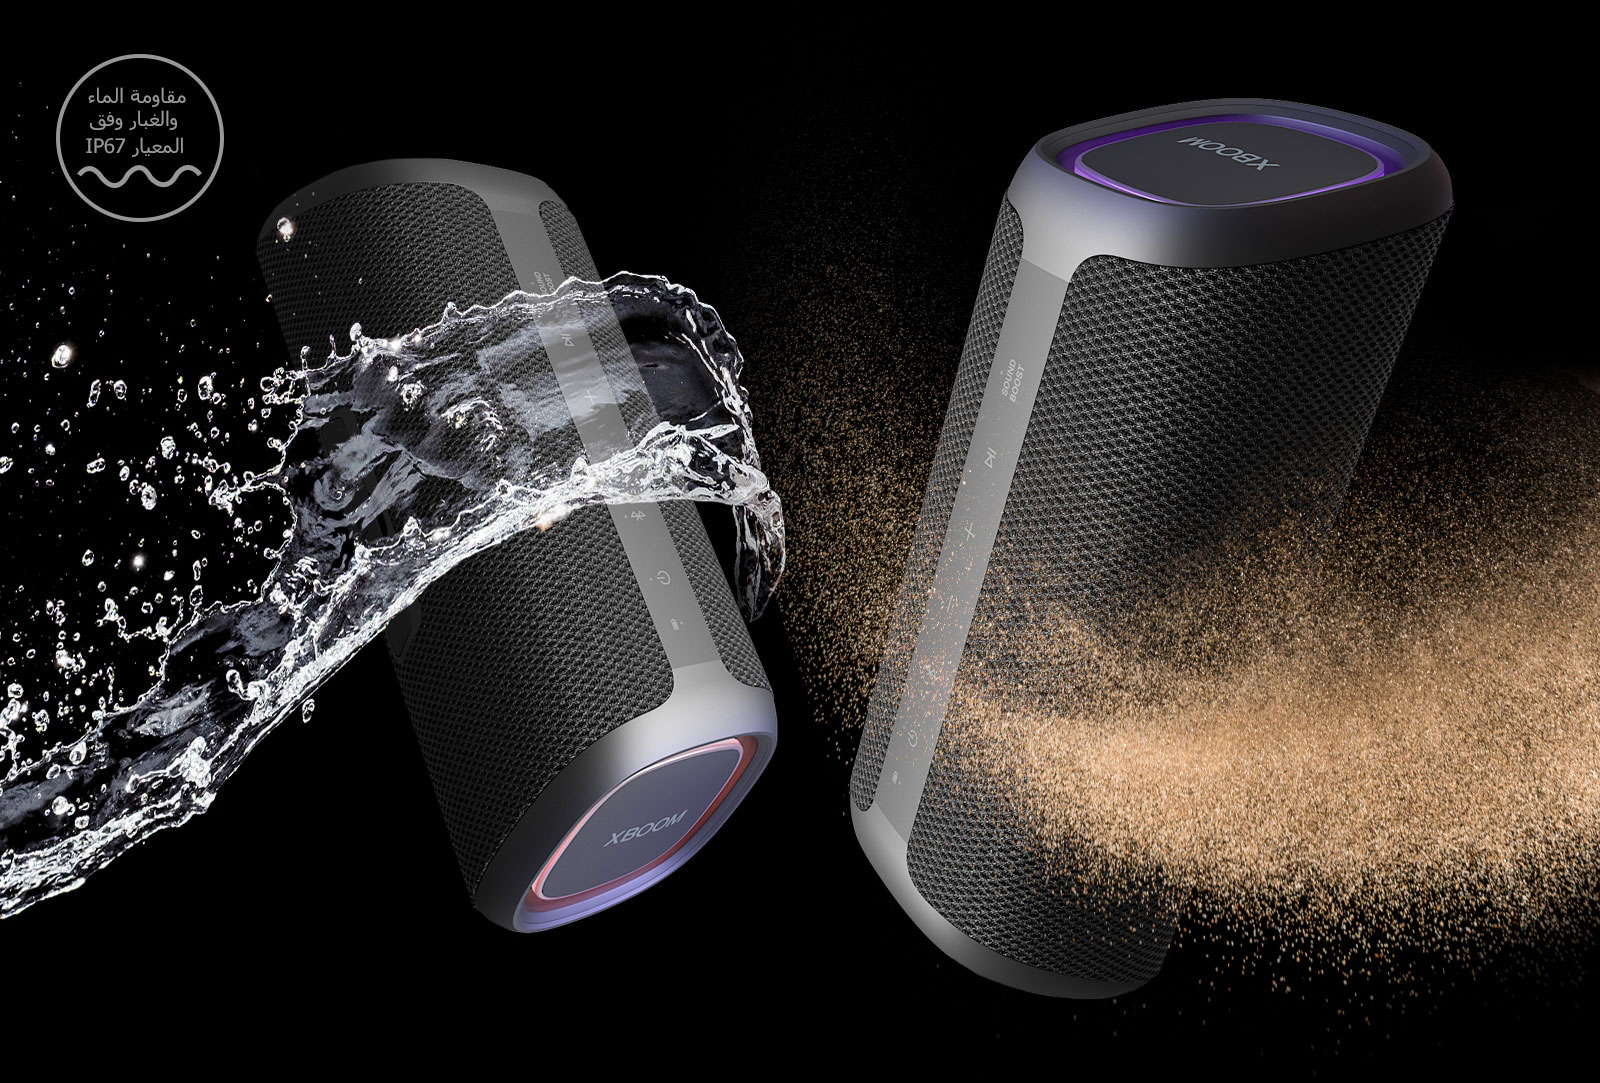 Two LG XBOOM Go XG5 speakers placed in an infinite void.  One shows that it is waterproof and the other is dustproof.